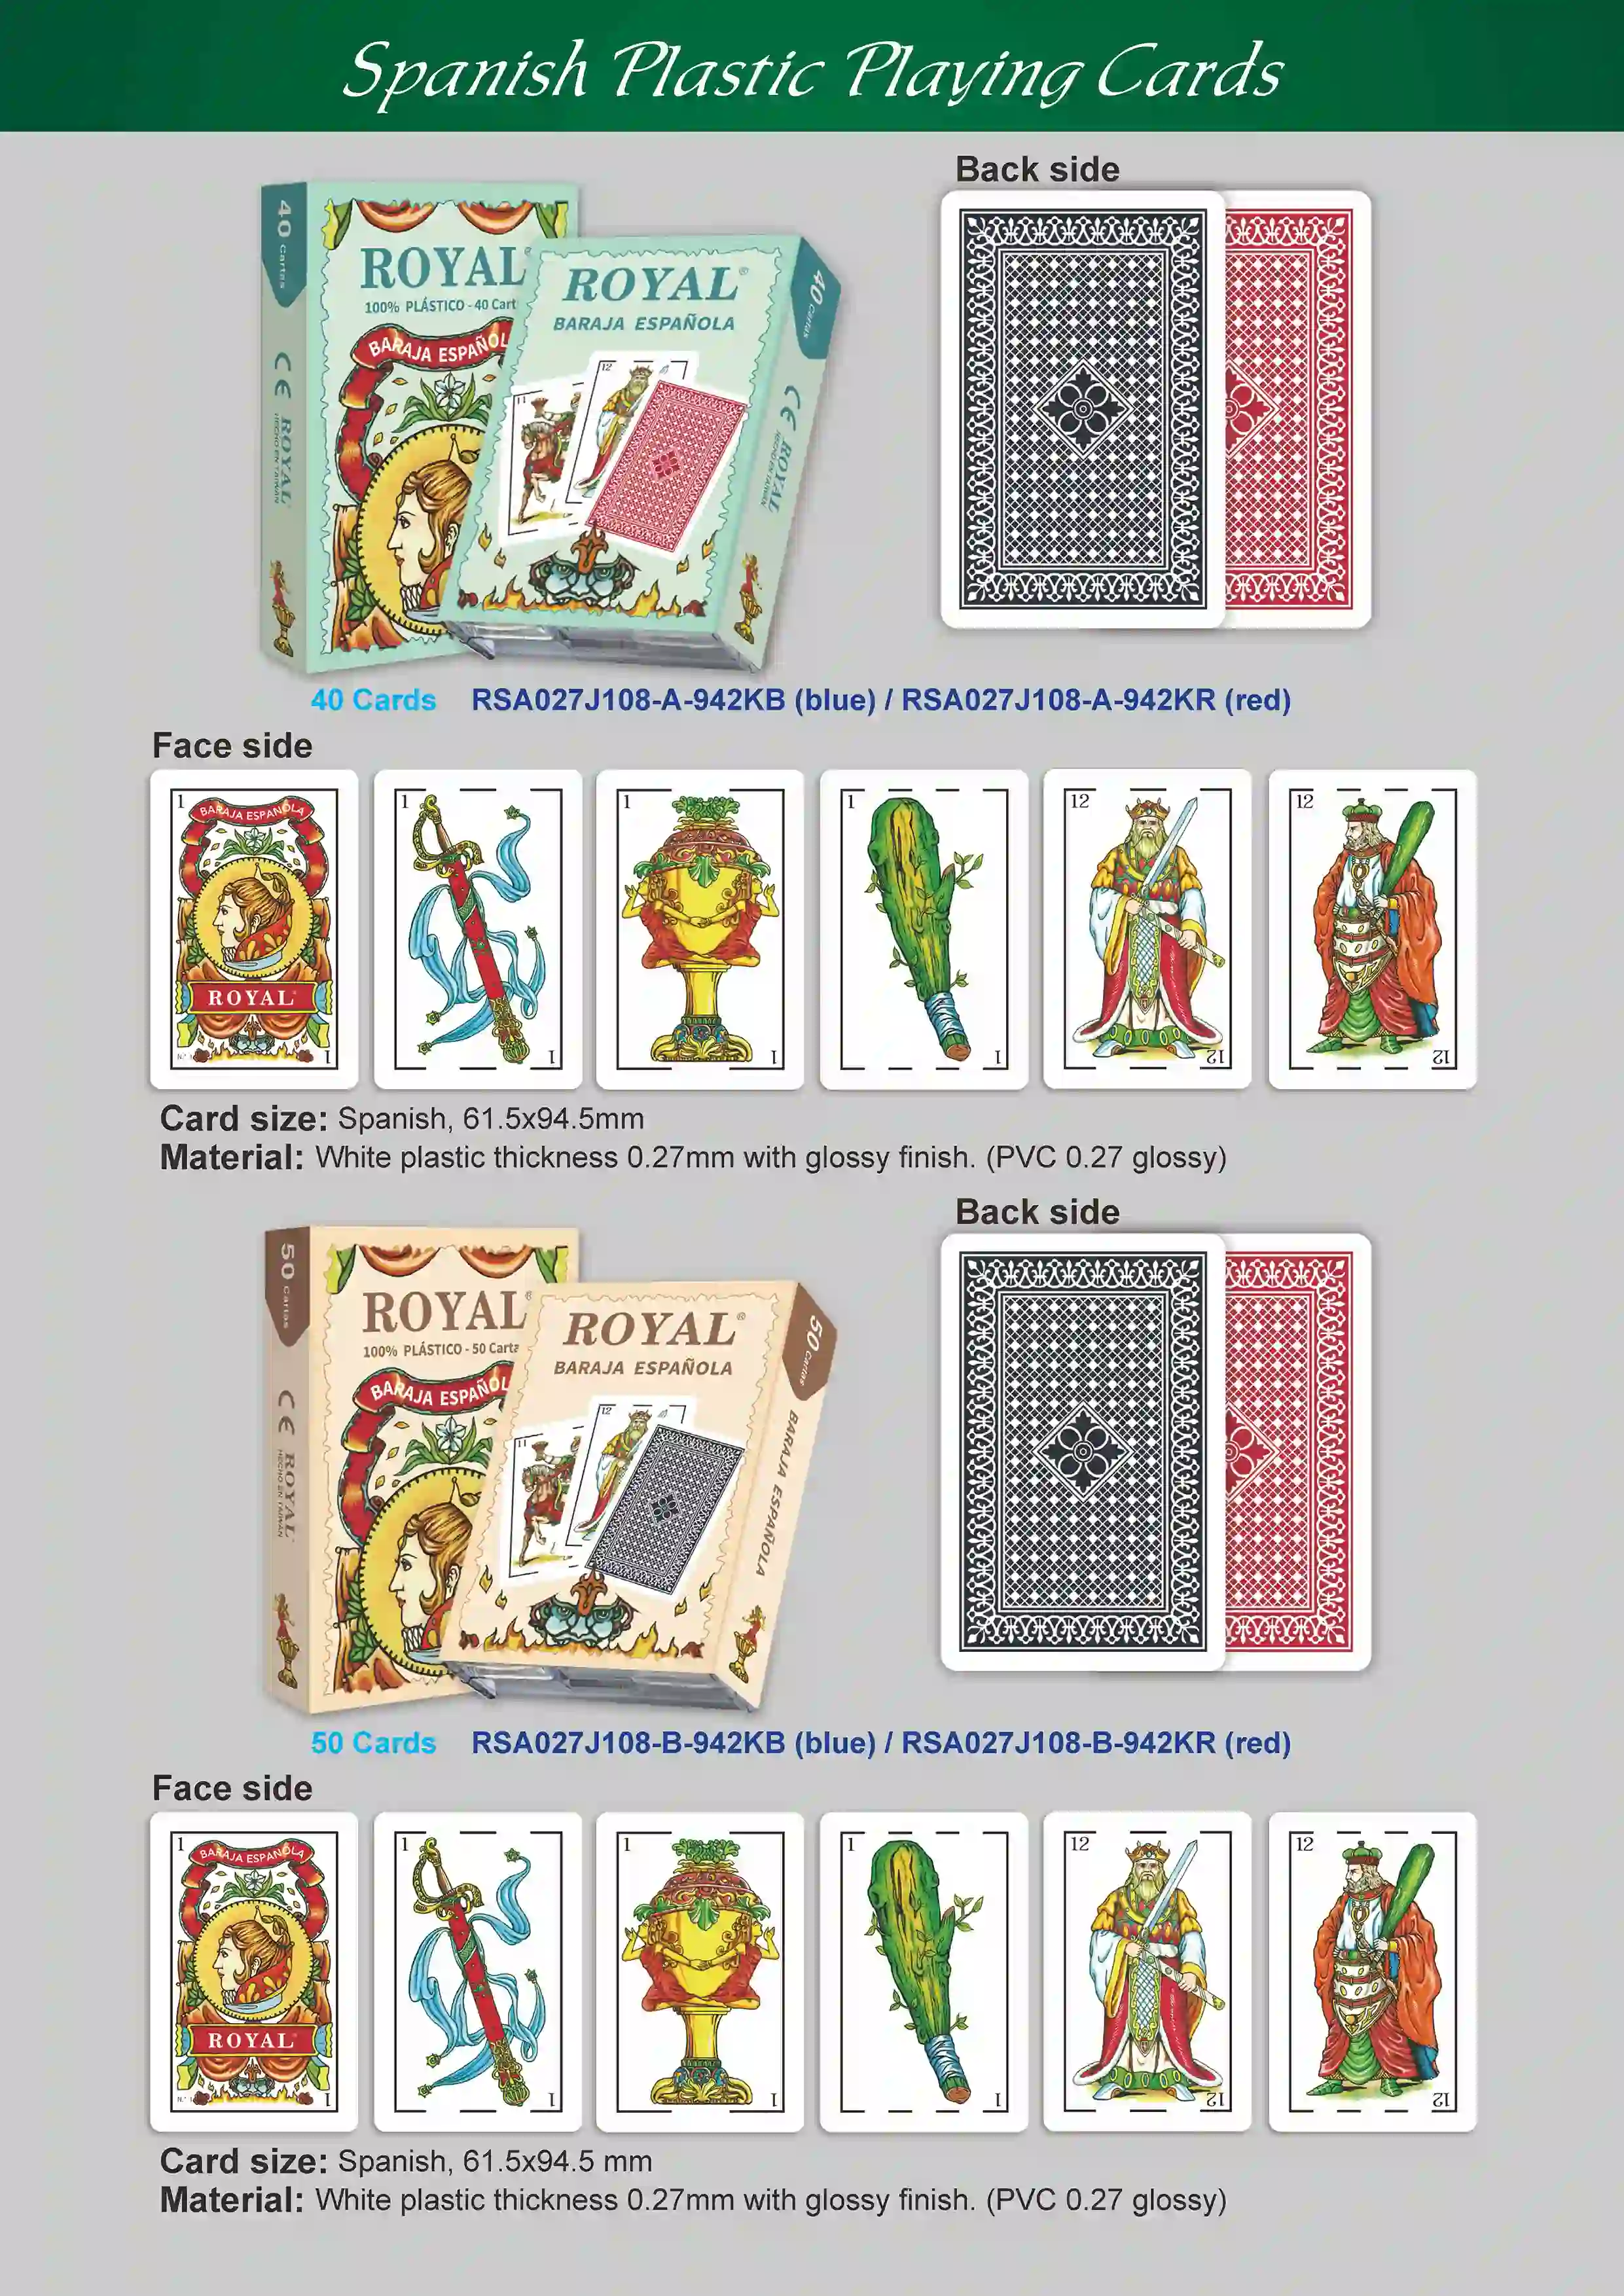 Spanish Plastic Playing Cards - 40 Cards